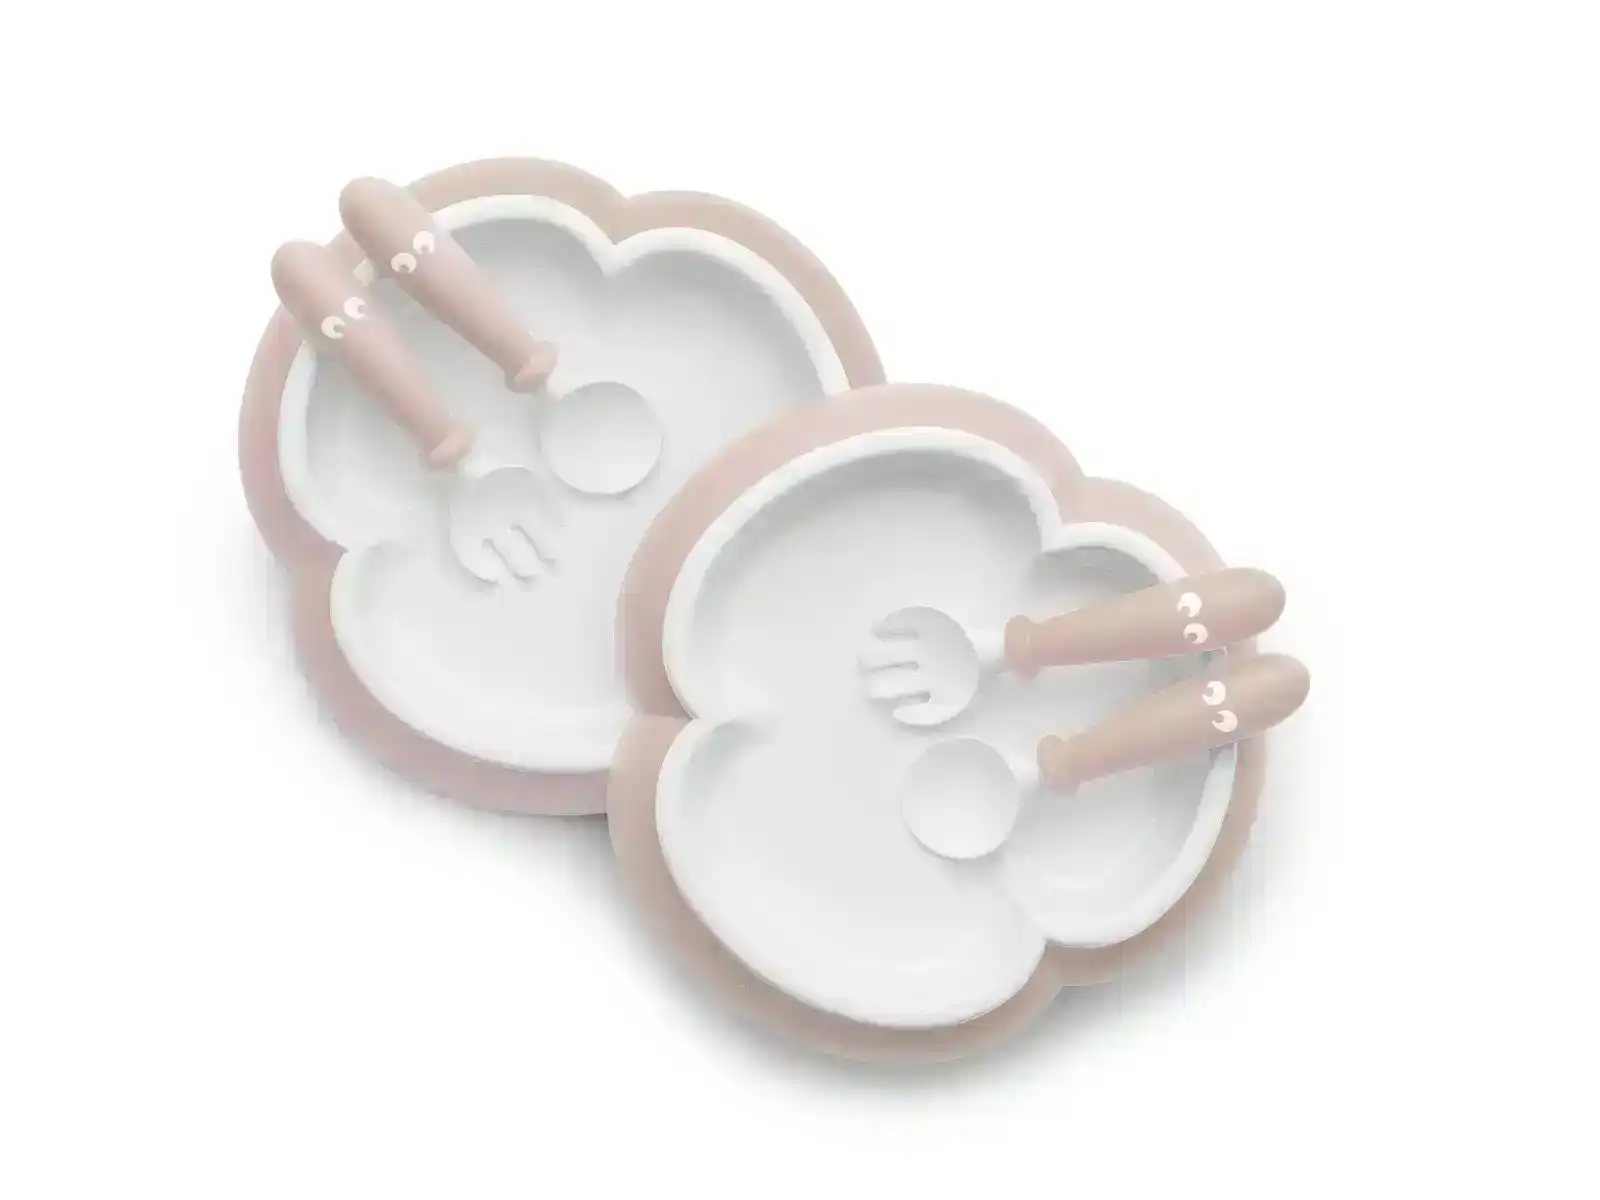 BabyBjorn Baby Plate - Spoon and Fork - Powder Pink 2-pack